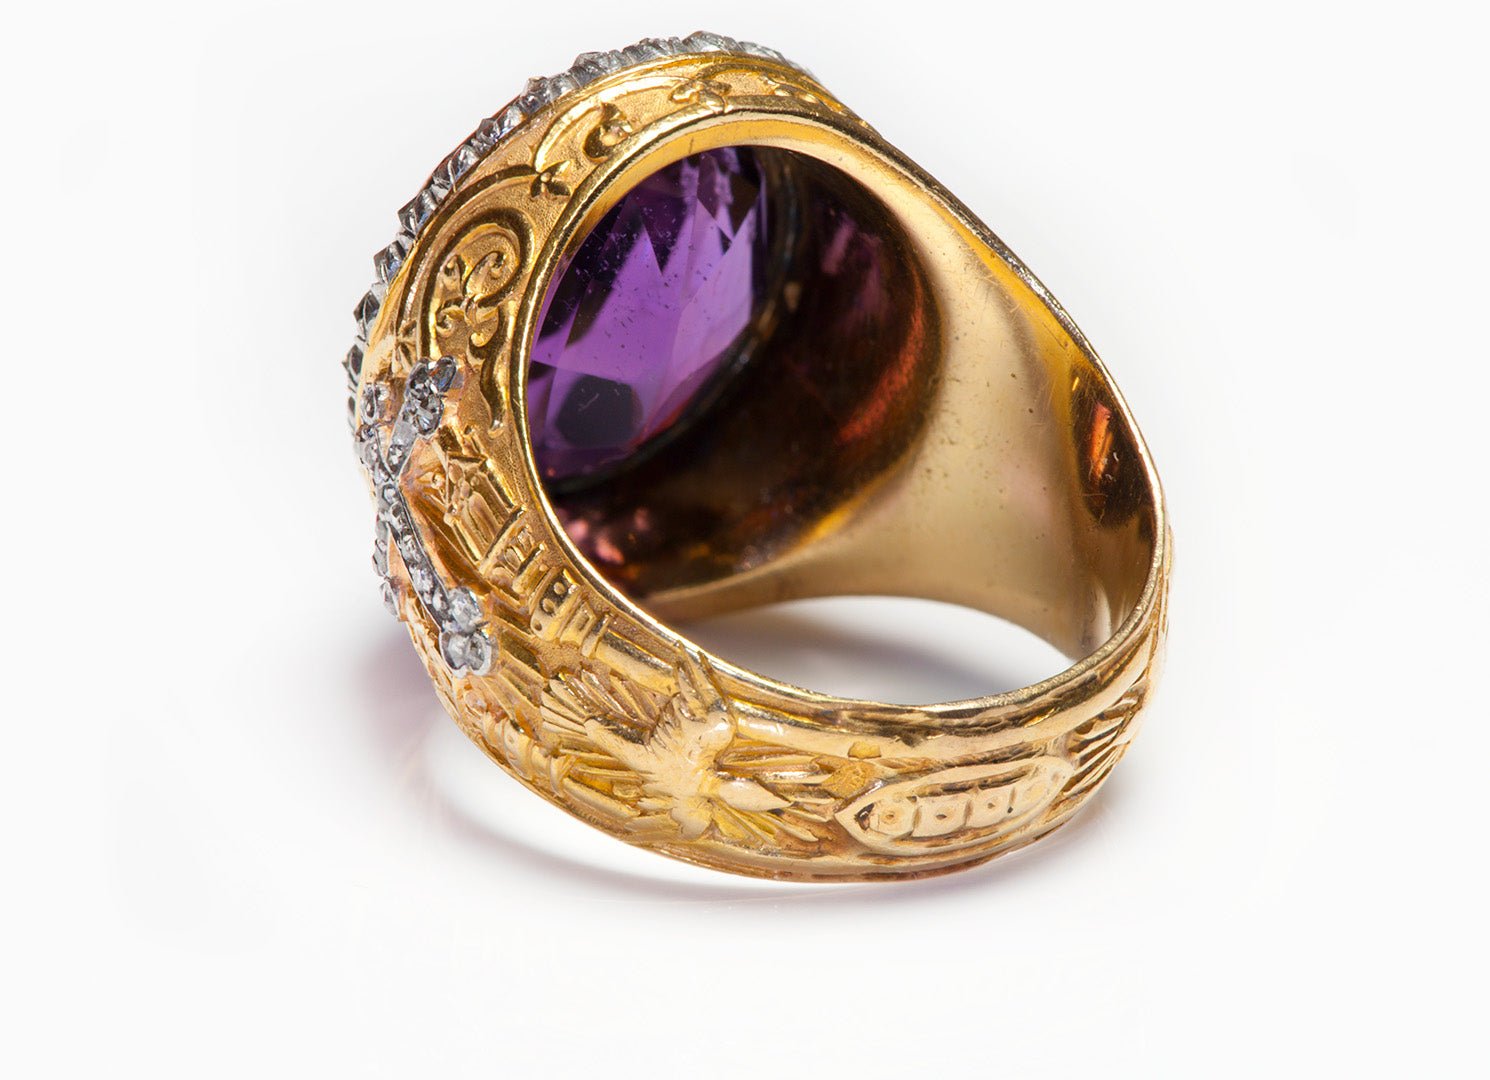 Antique Amethyst Diamond 18K Gold Bishop Ring - DSF Antique Jewelry